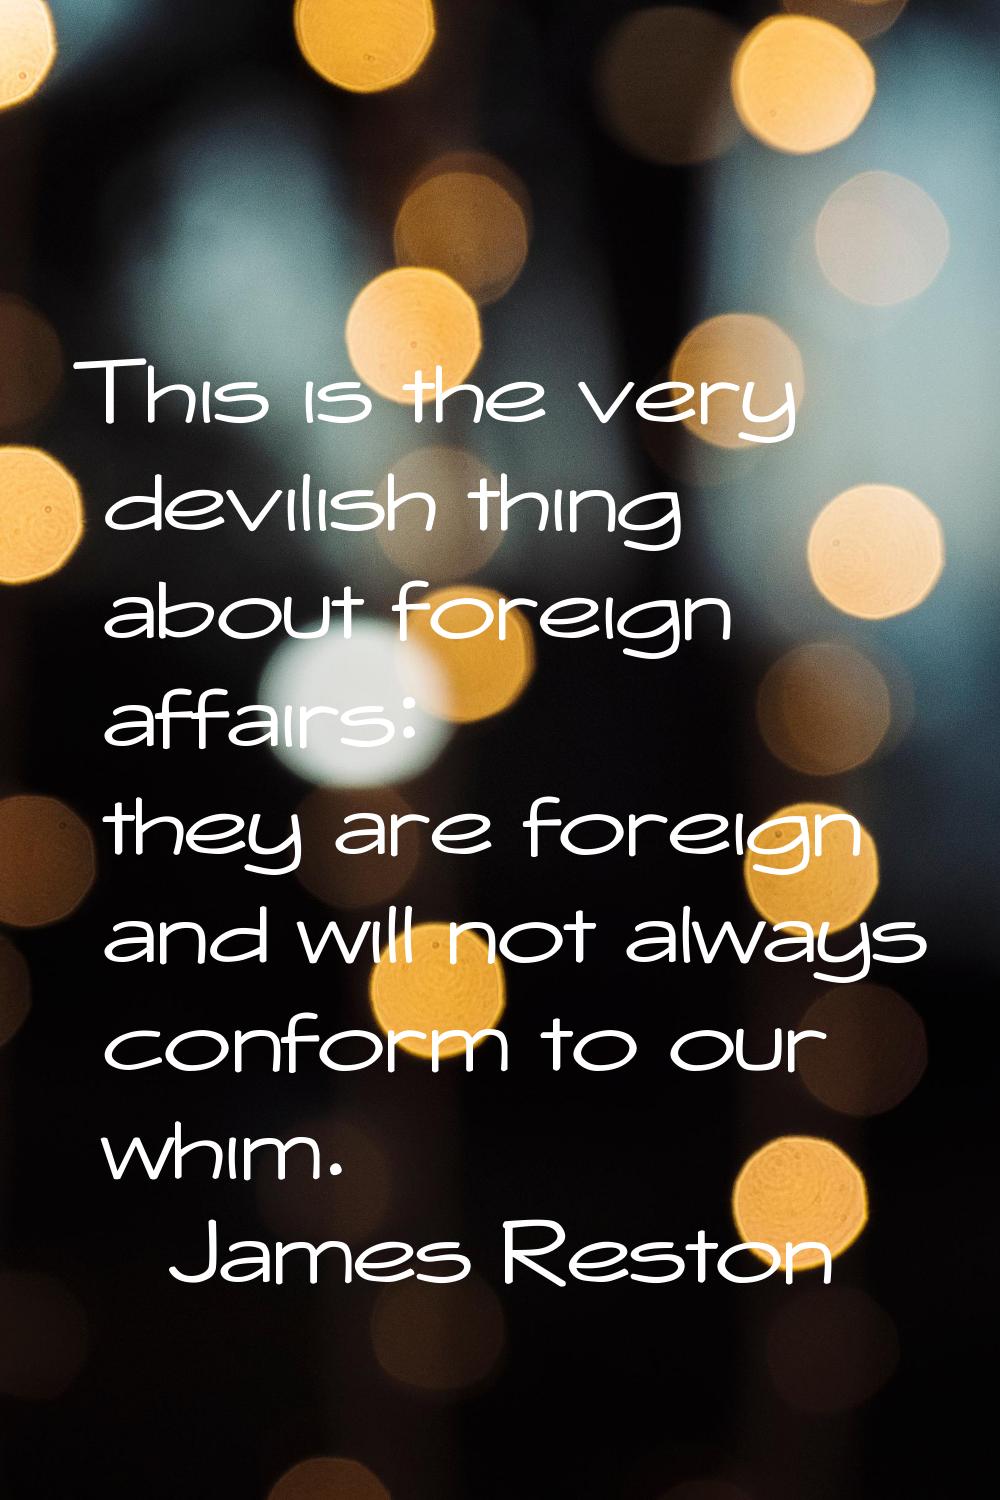 This is the very devilish thing about foreign affairs: they are foreign and will not always conform